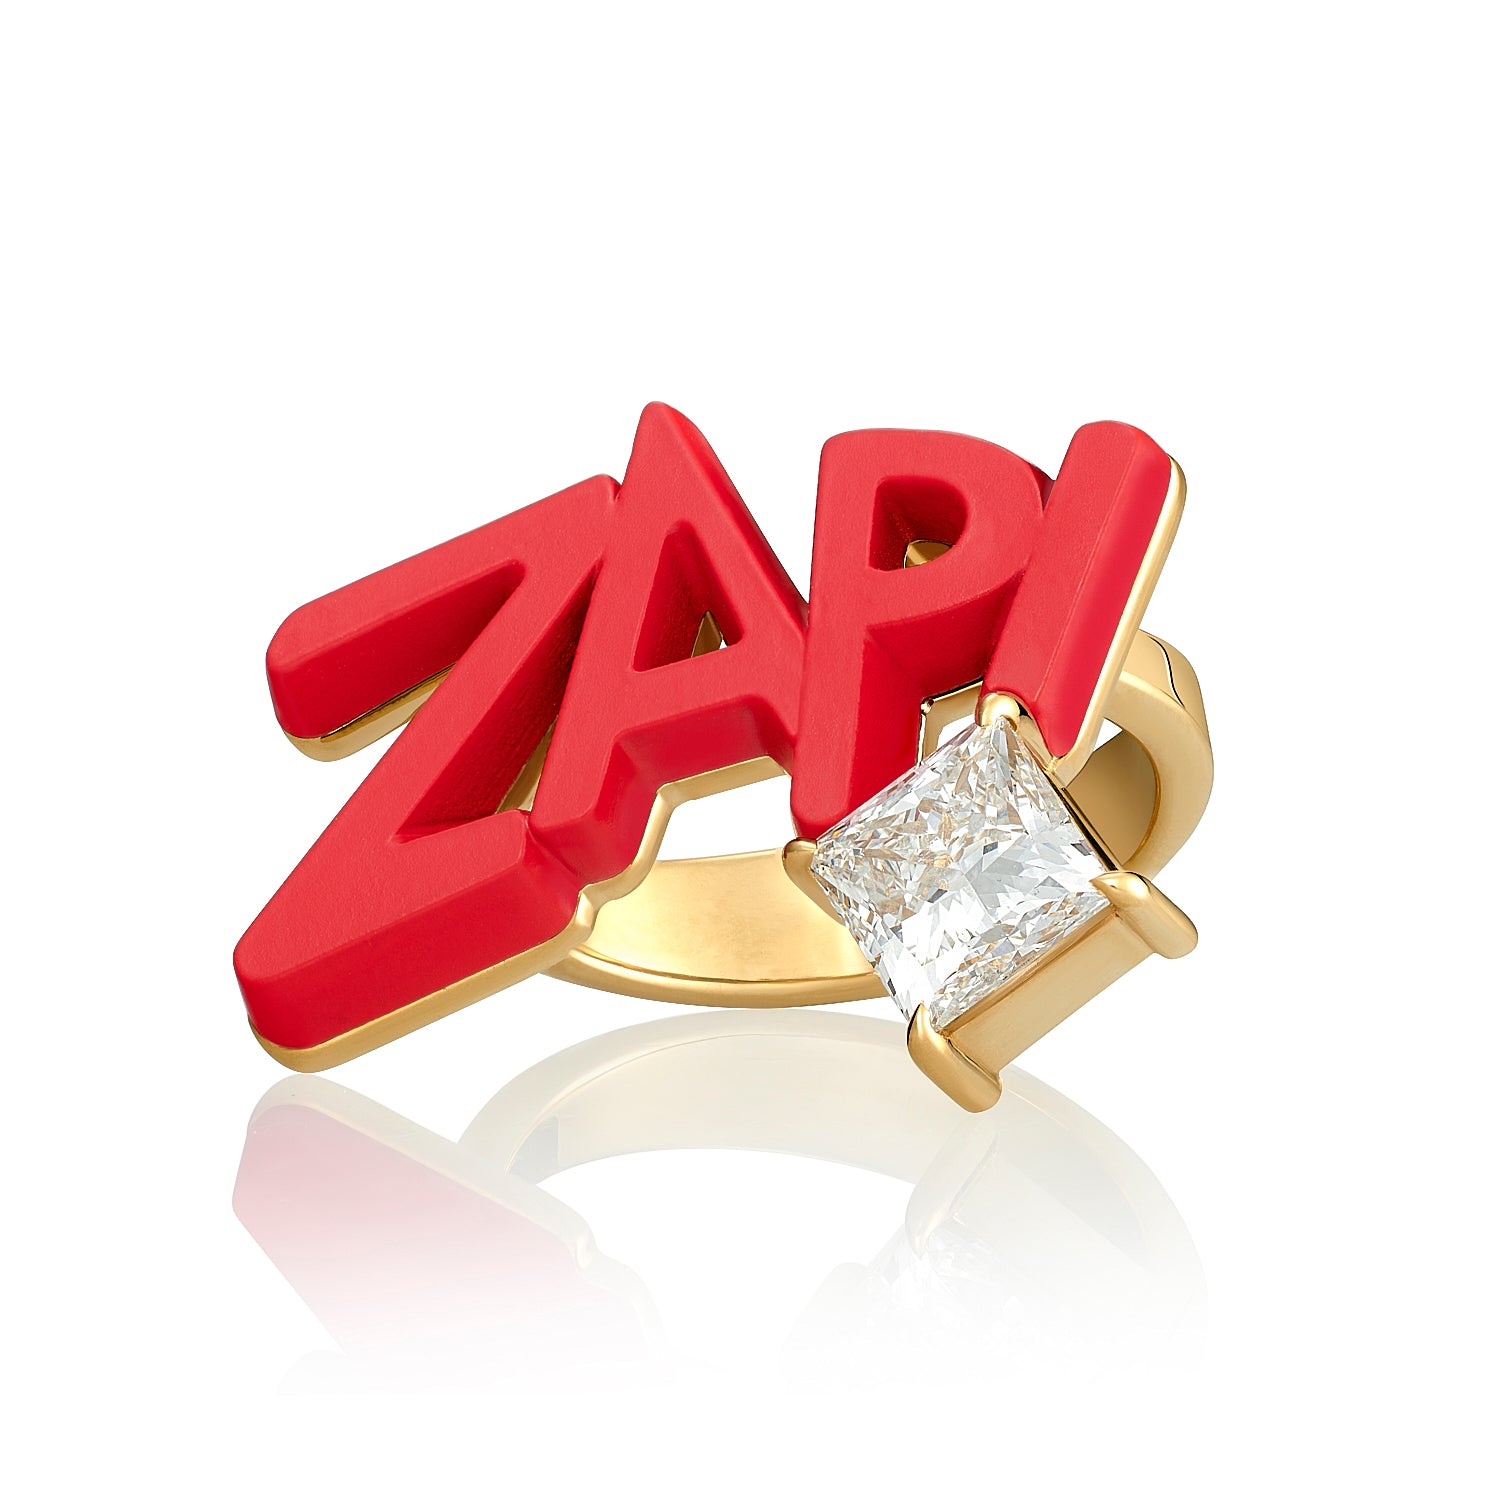 The ZAP ring